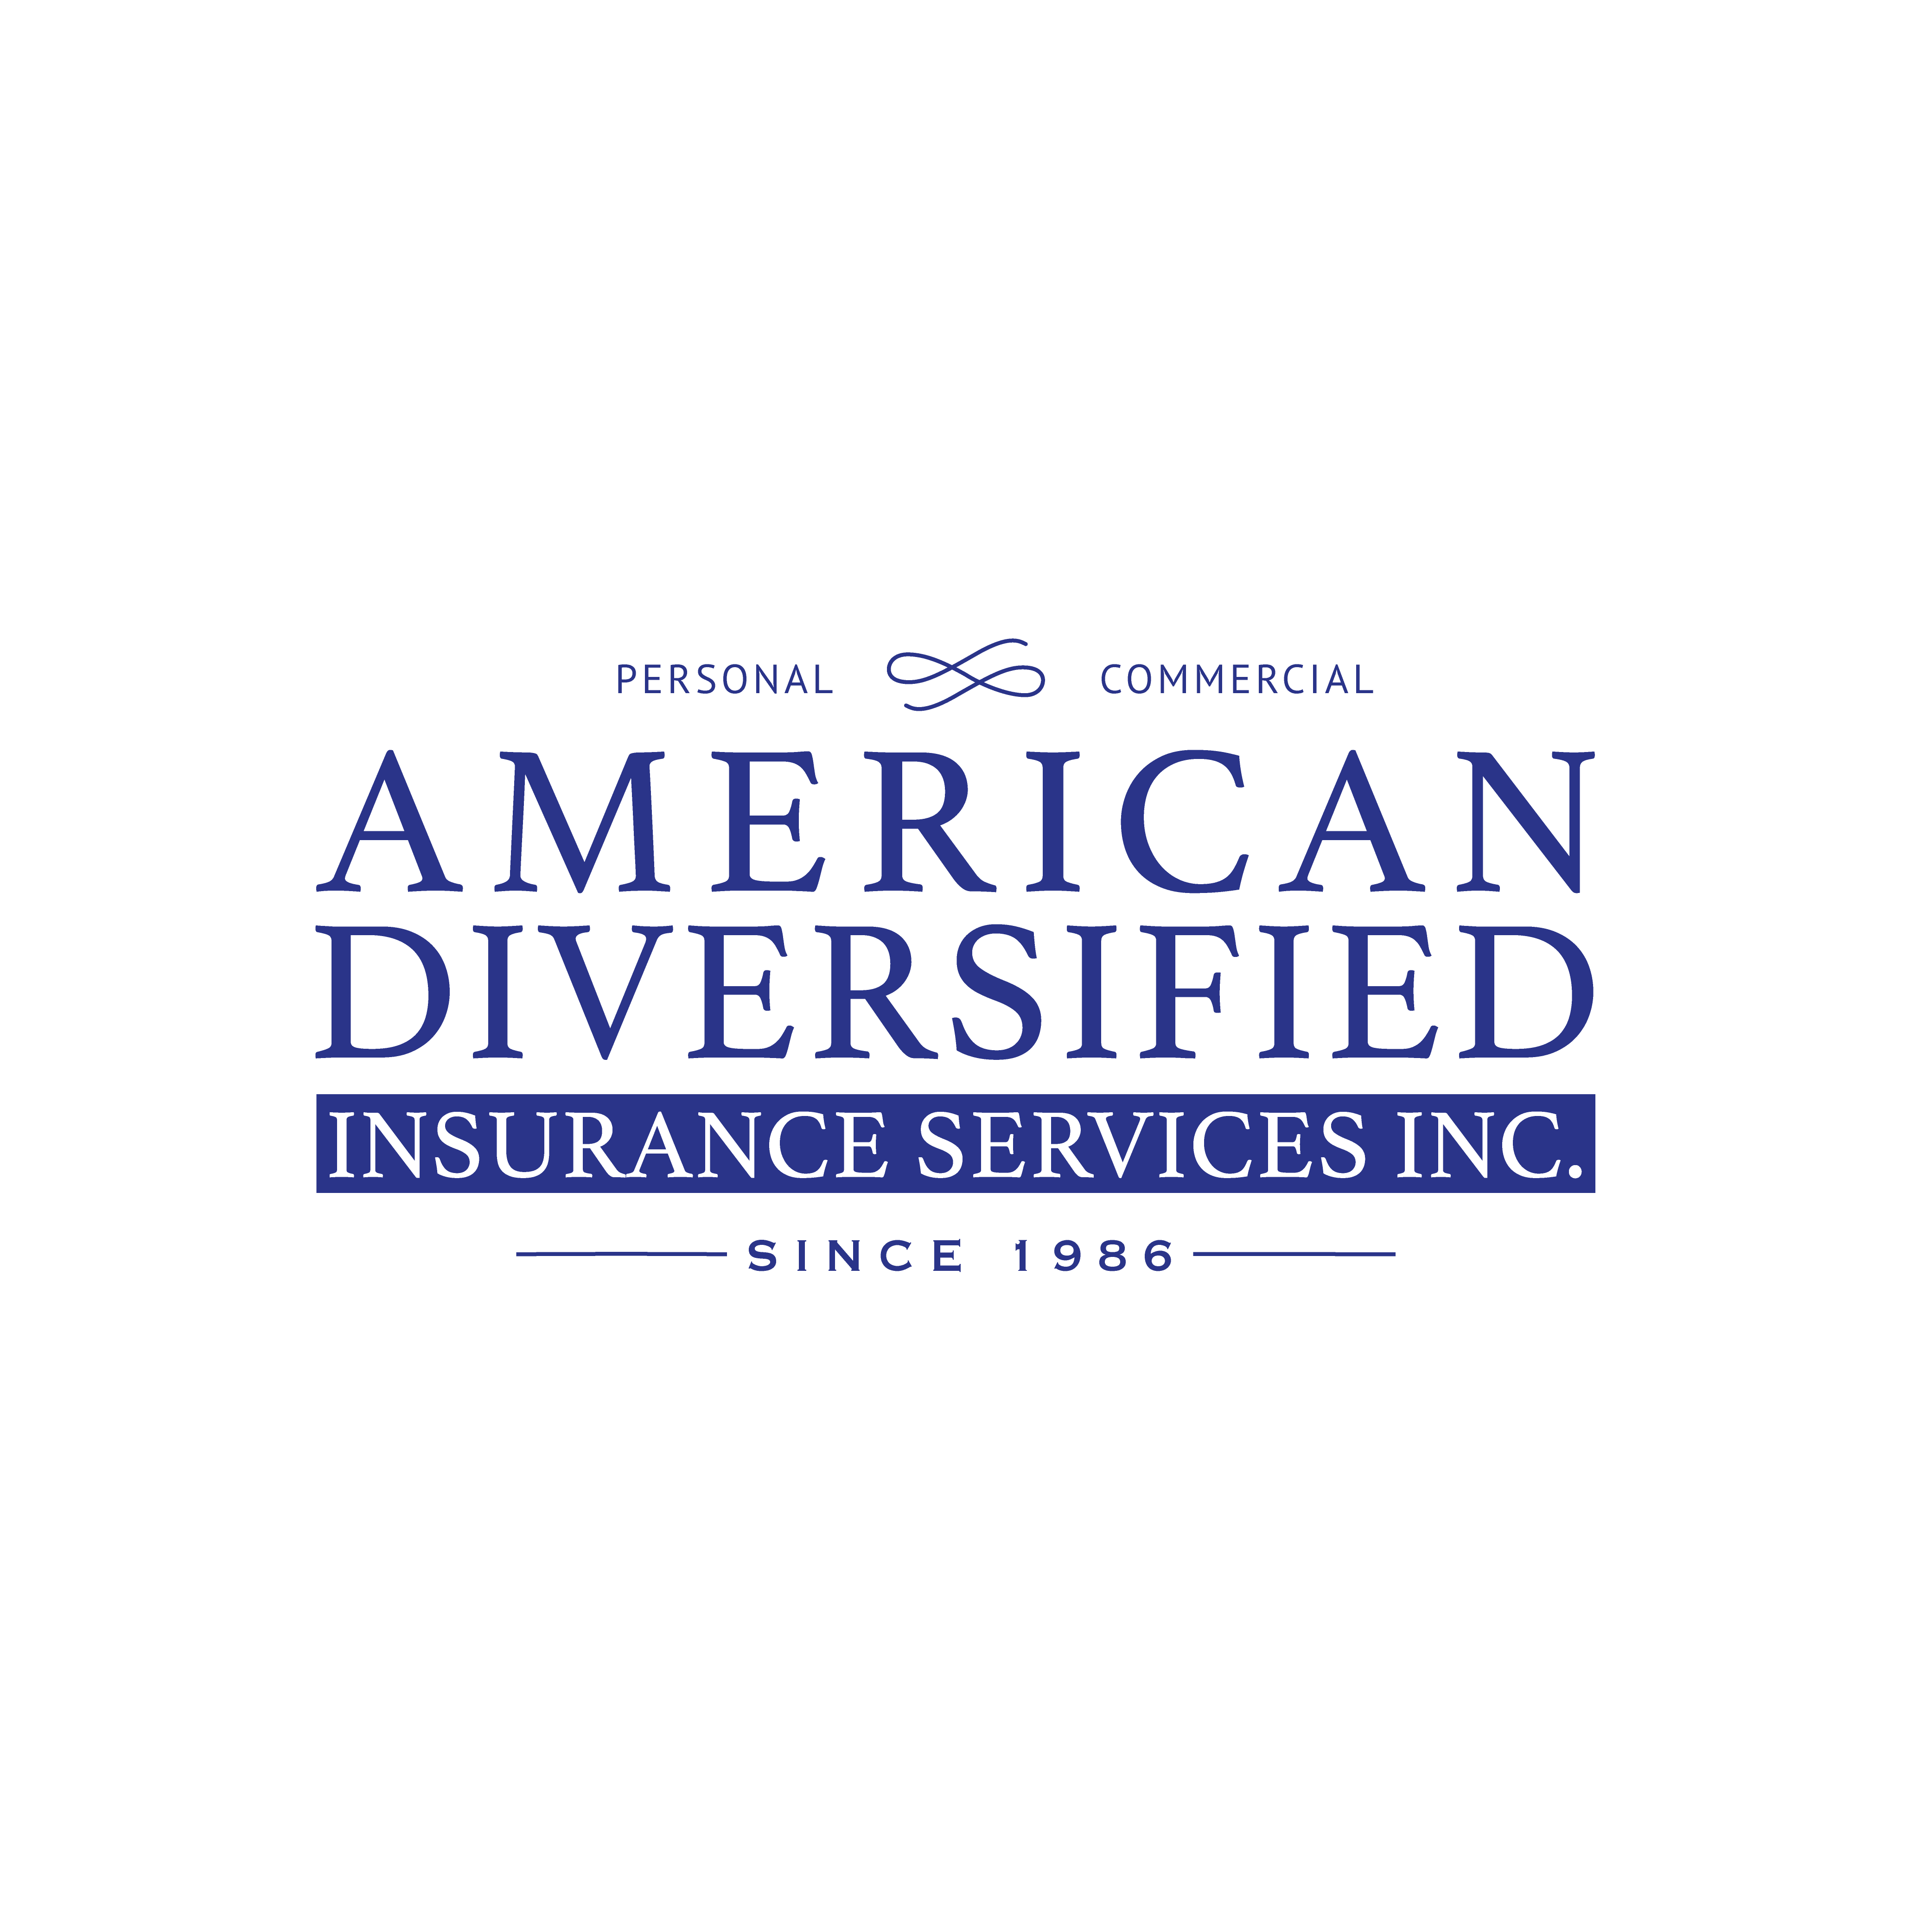 American Diversified Insurance Services, Inc | 201 Natoma St, Folsom, CA, 95630 | +1 (916) 985-7500